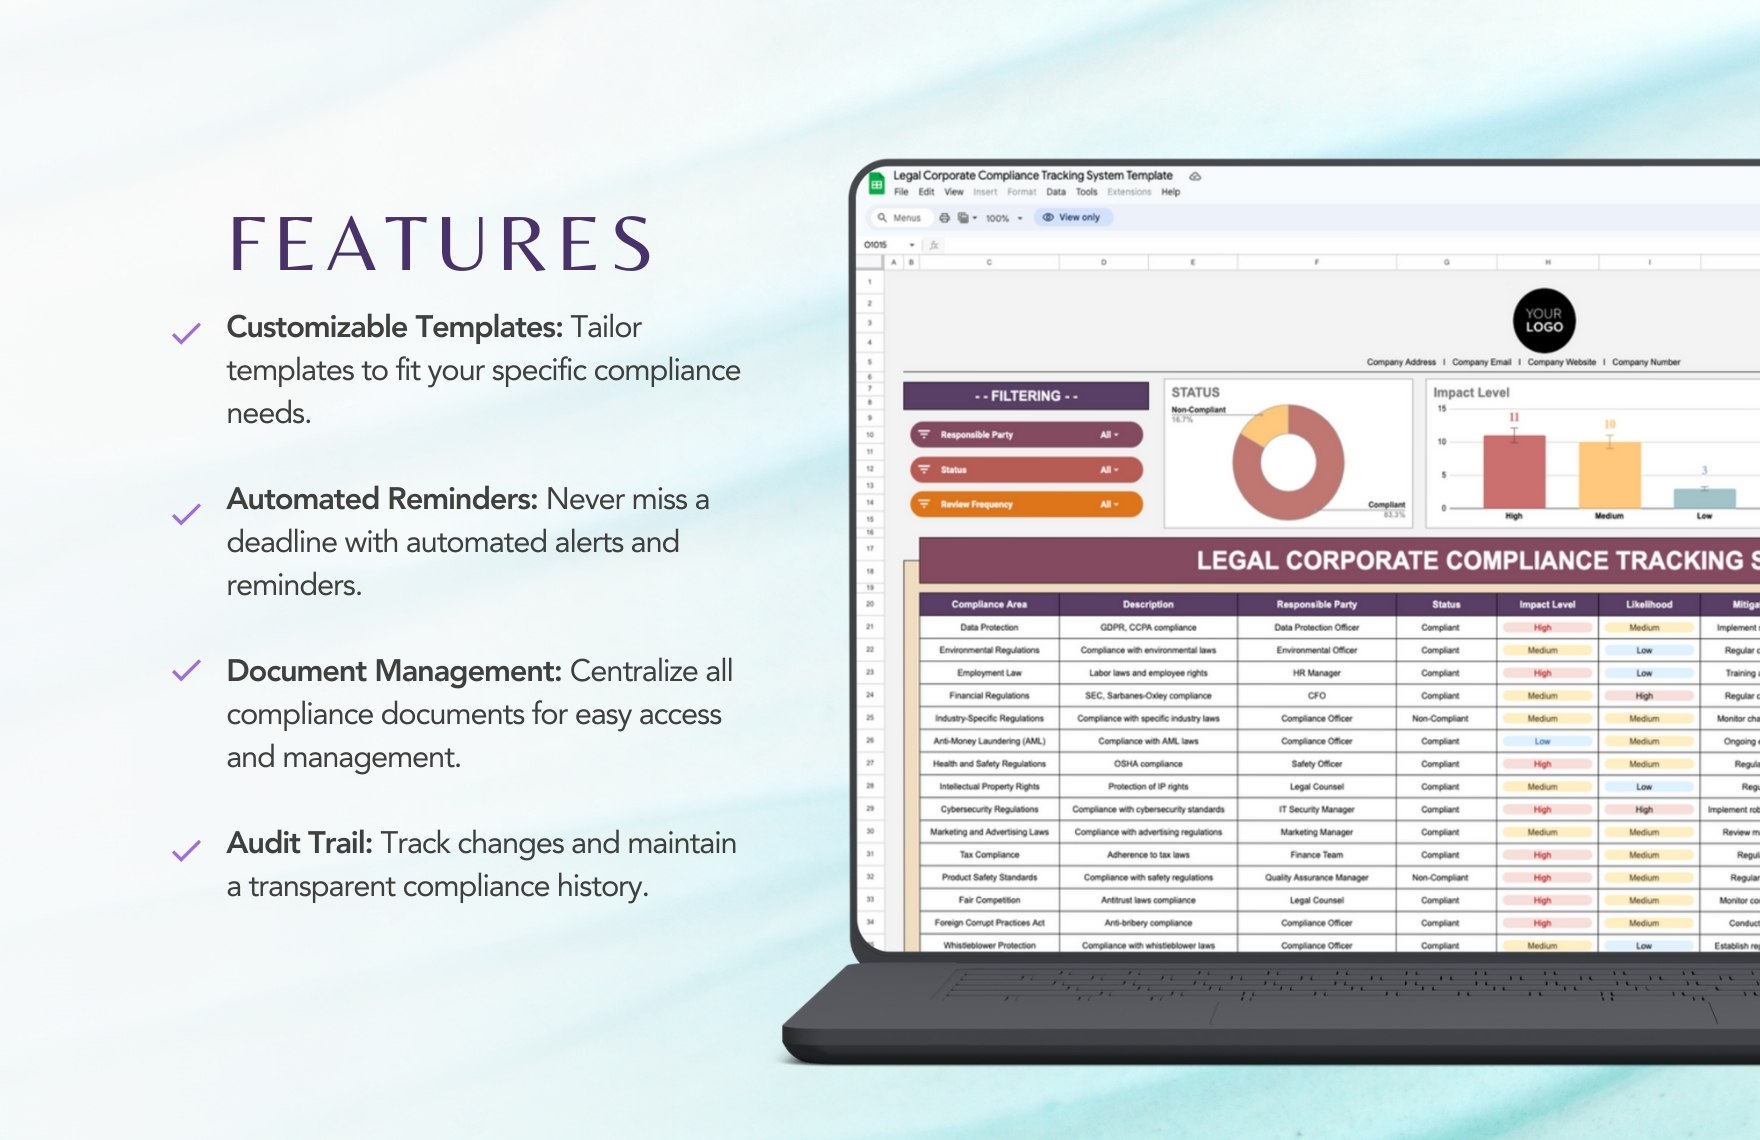 Legal Corporate Compliance Tracking System Template